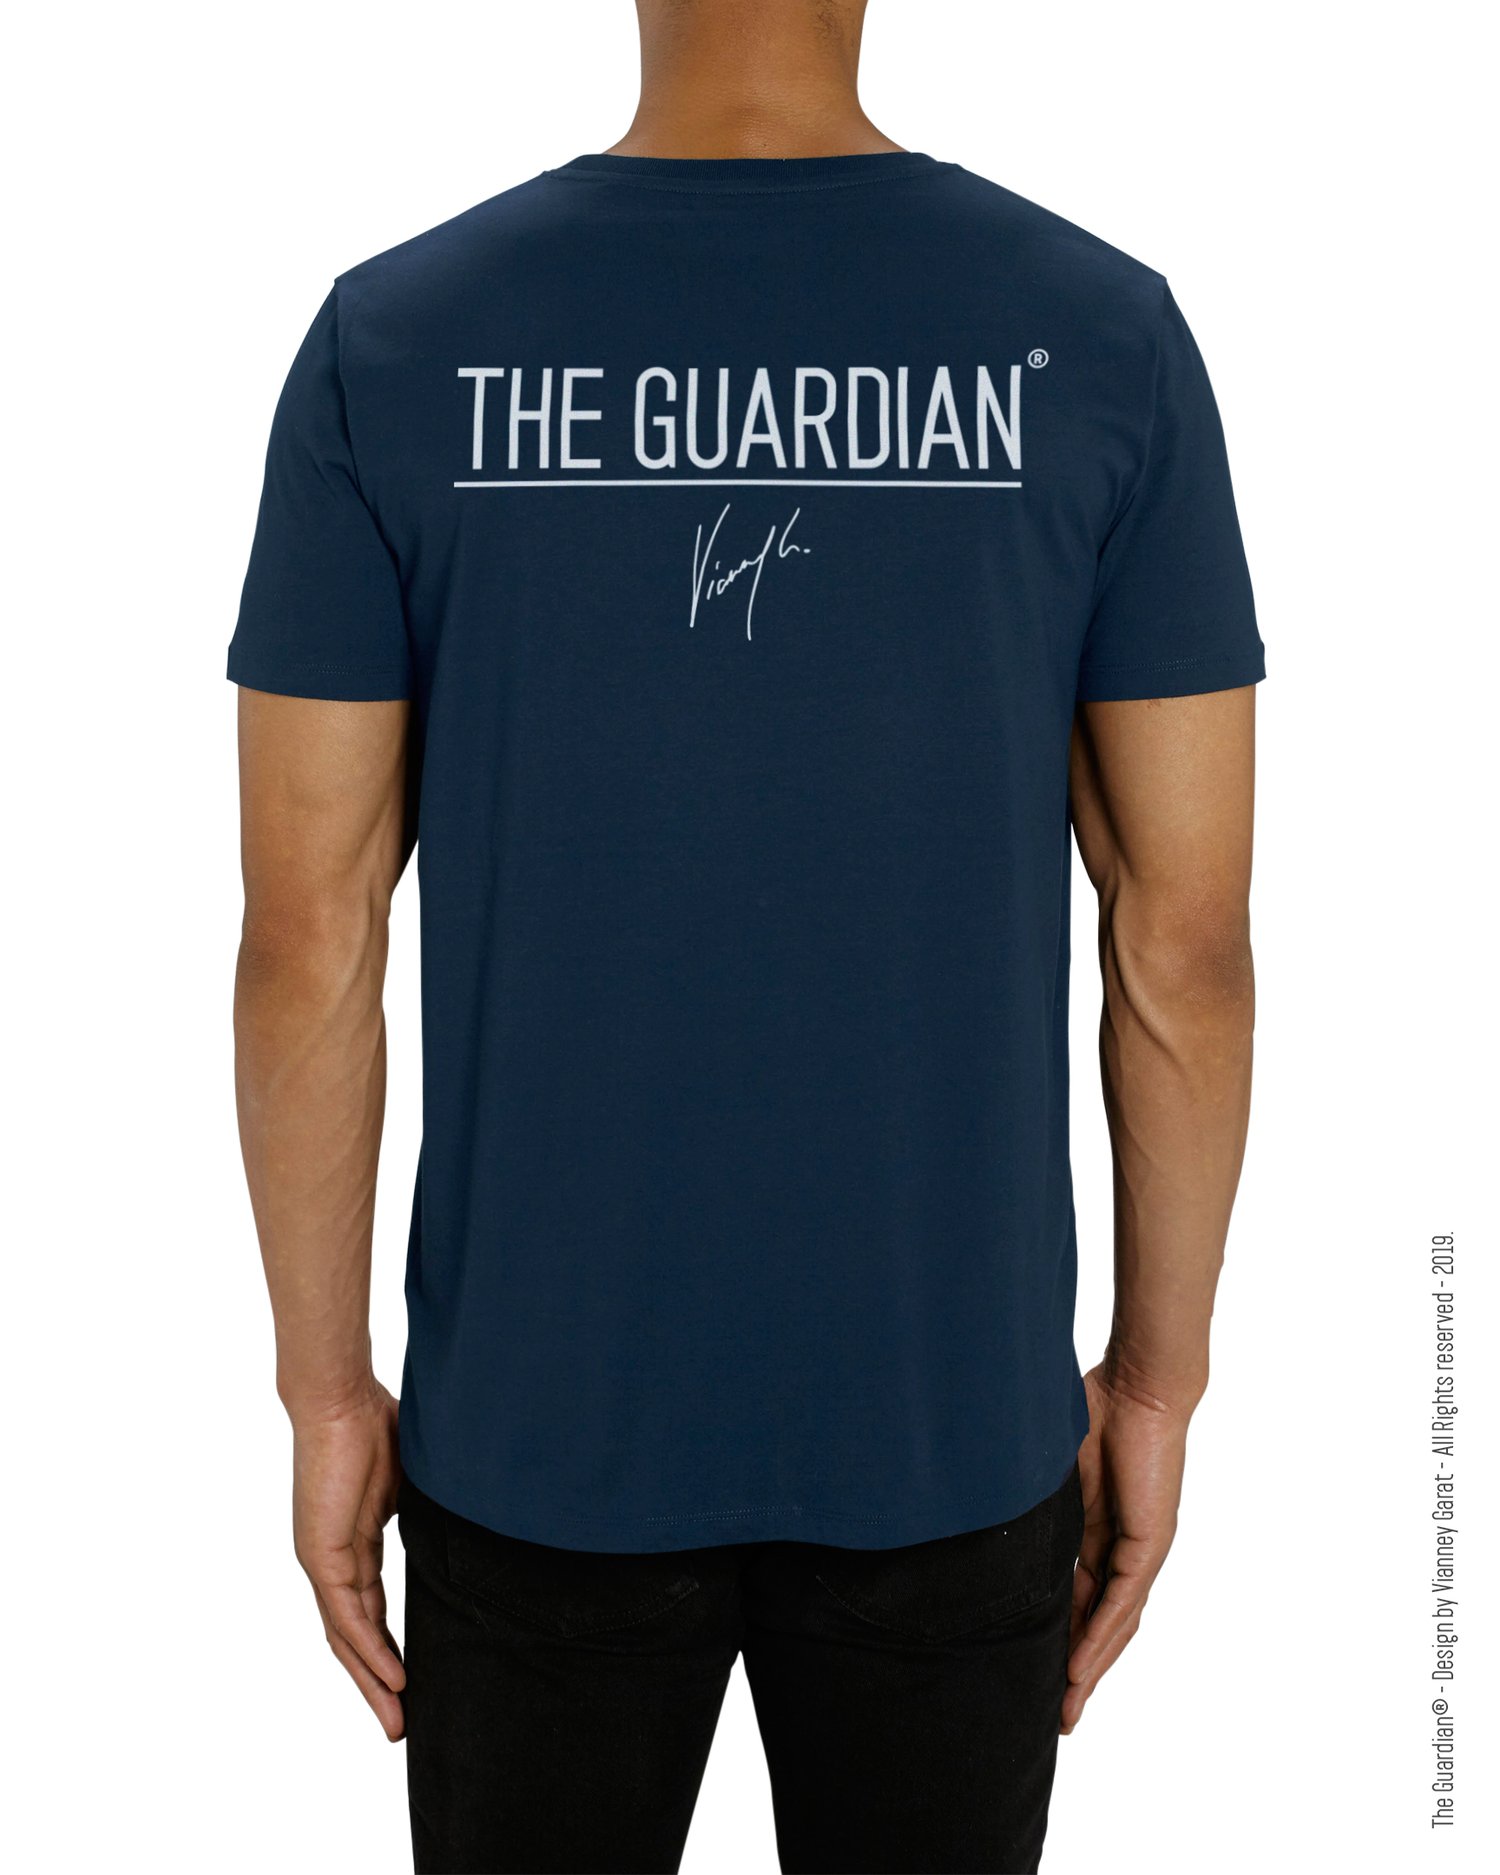 Image of T-Shirt The Guardian® Blue Navy Edition